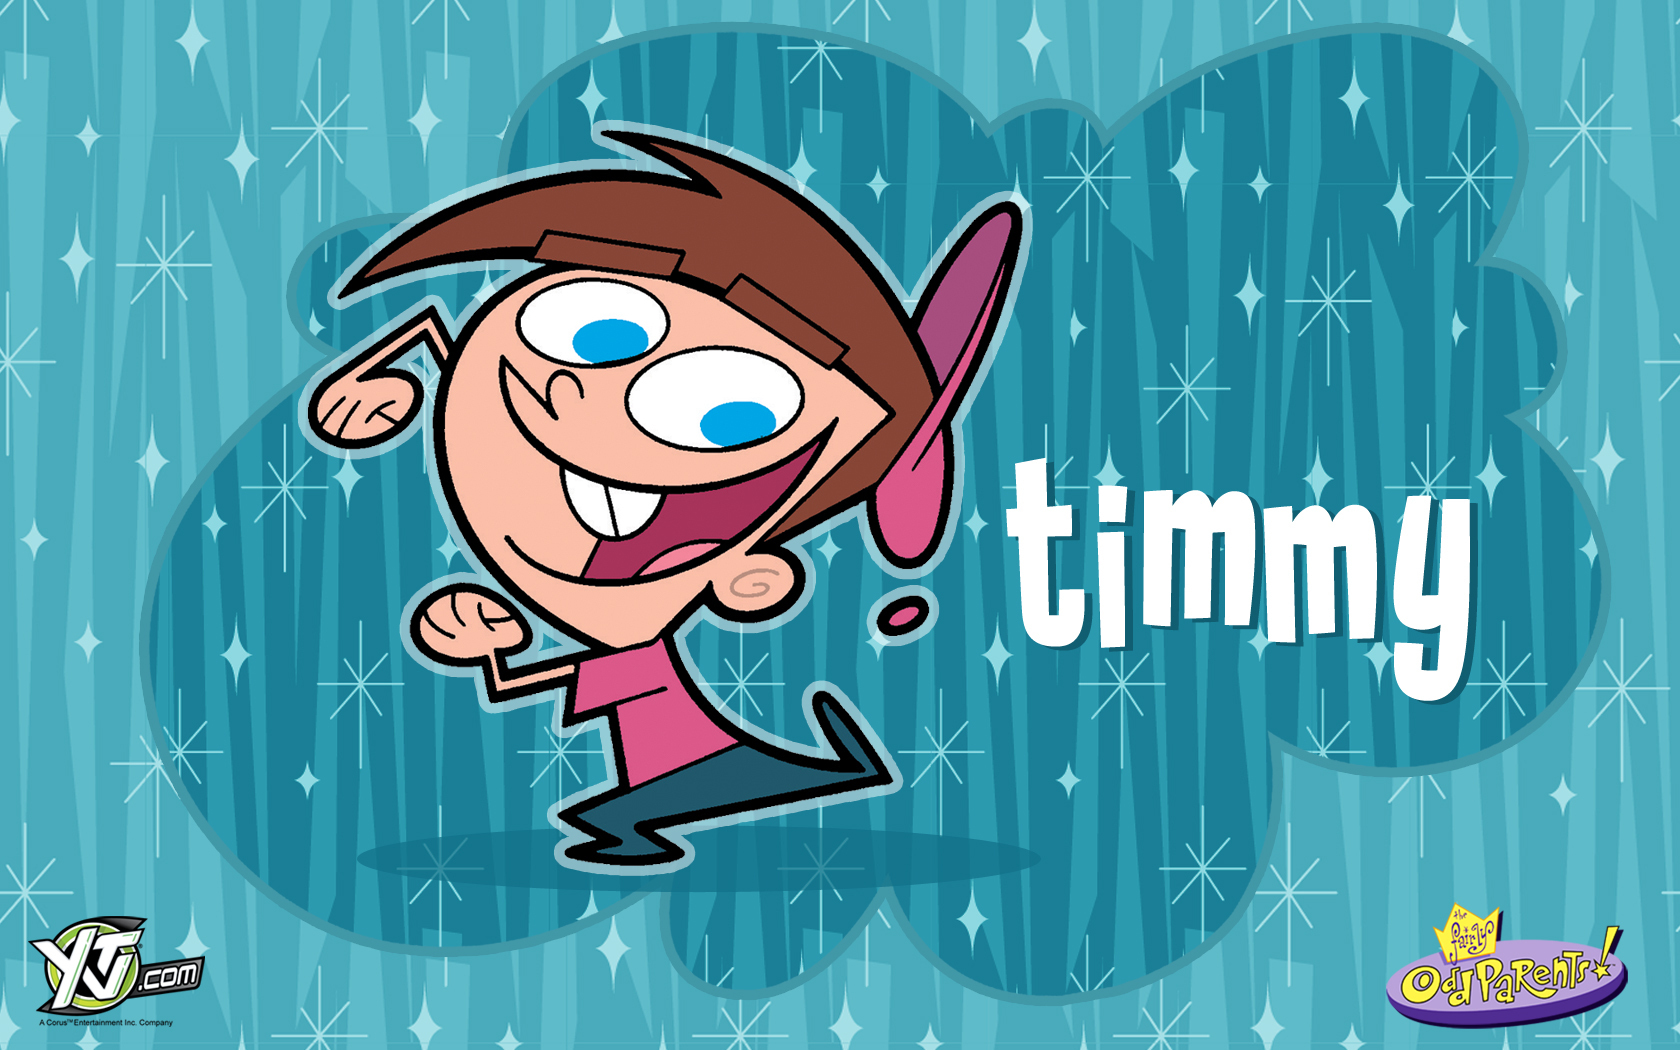  OddParents images Timmy HD wallpaper and background photos 23195966 1680x1050